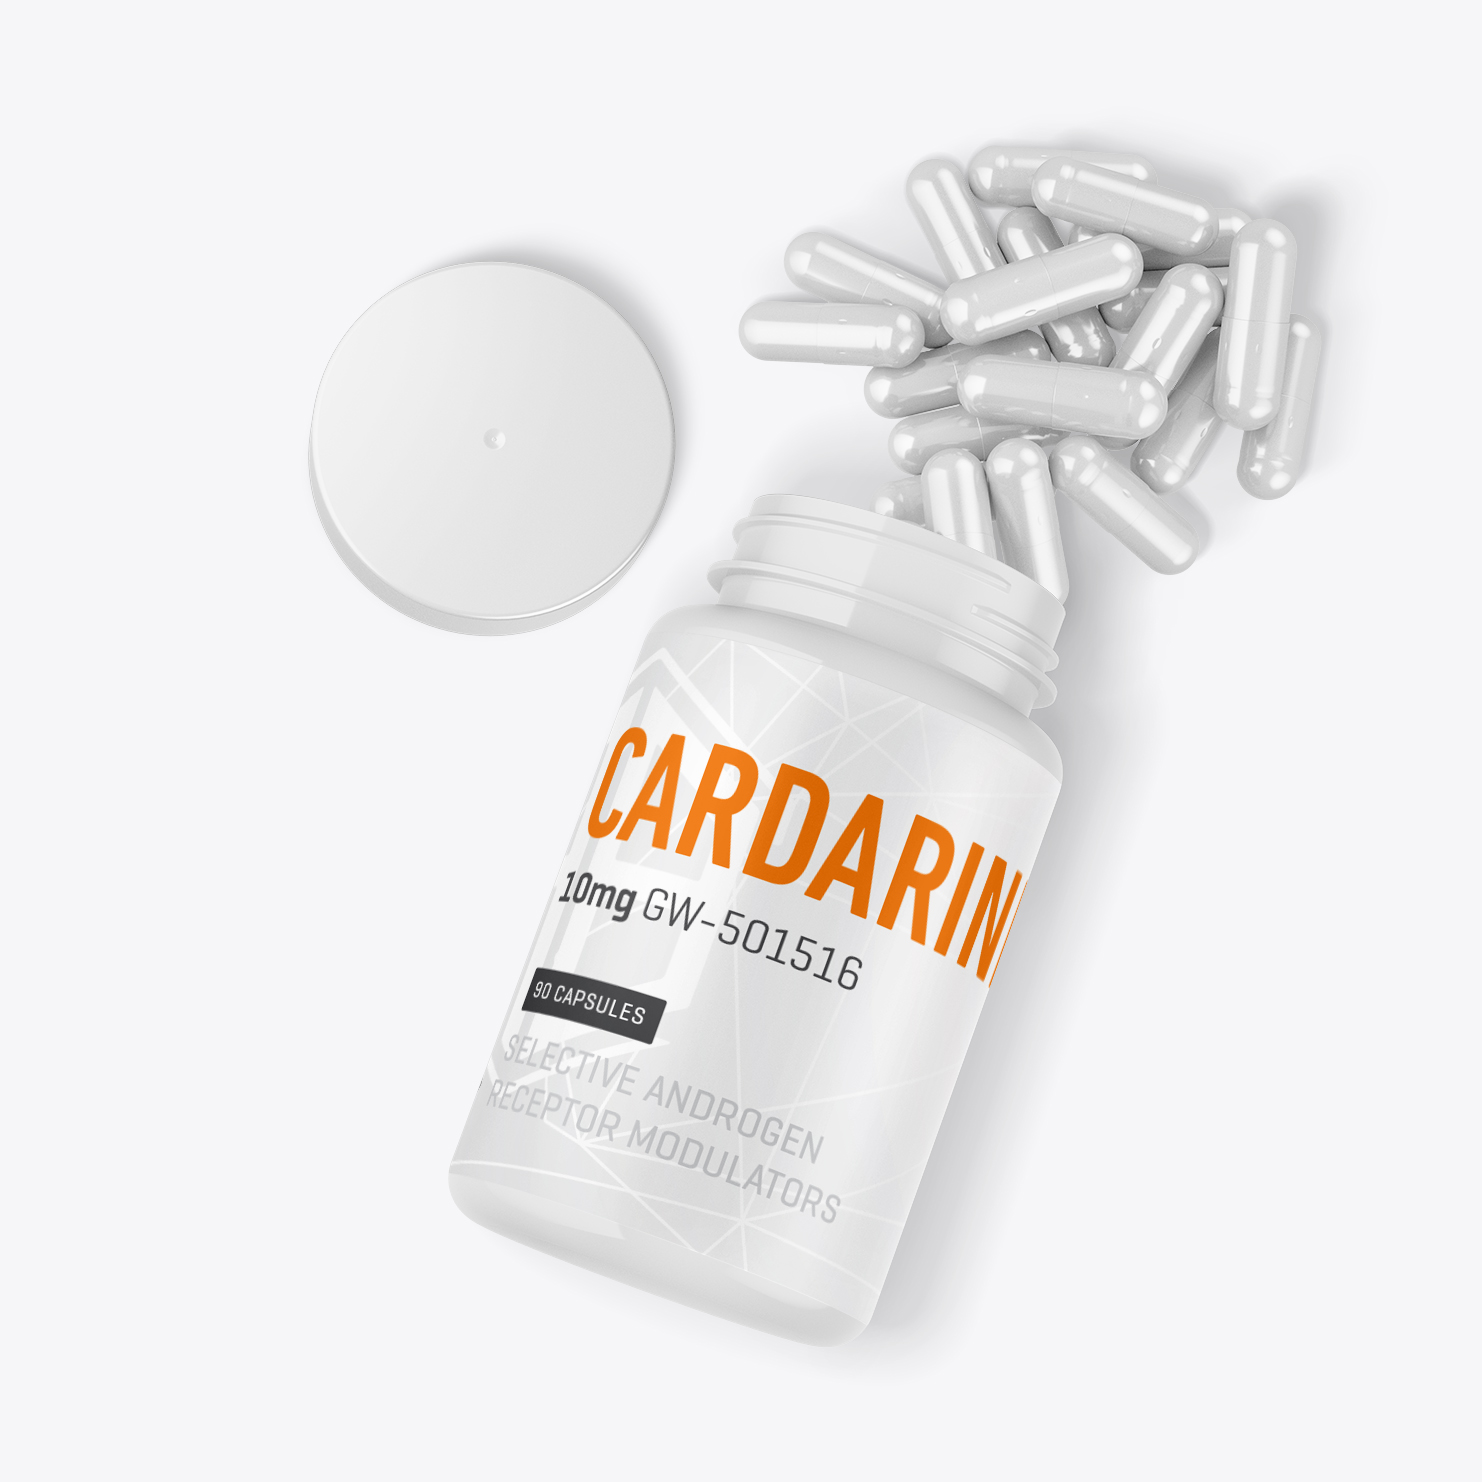 Cardarine GW-501516 SARMs Canada Capsules - Opened Bottle of Cardarine with 90 capsules of 10mg